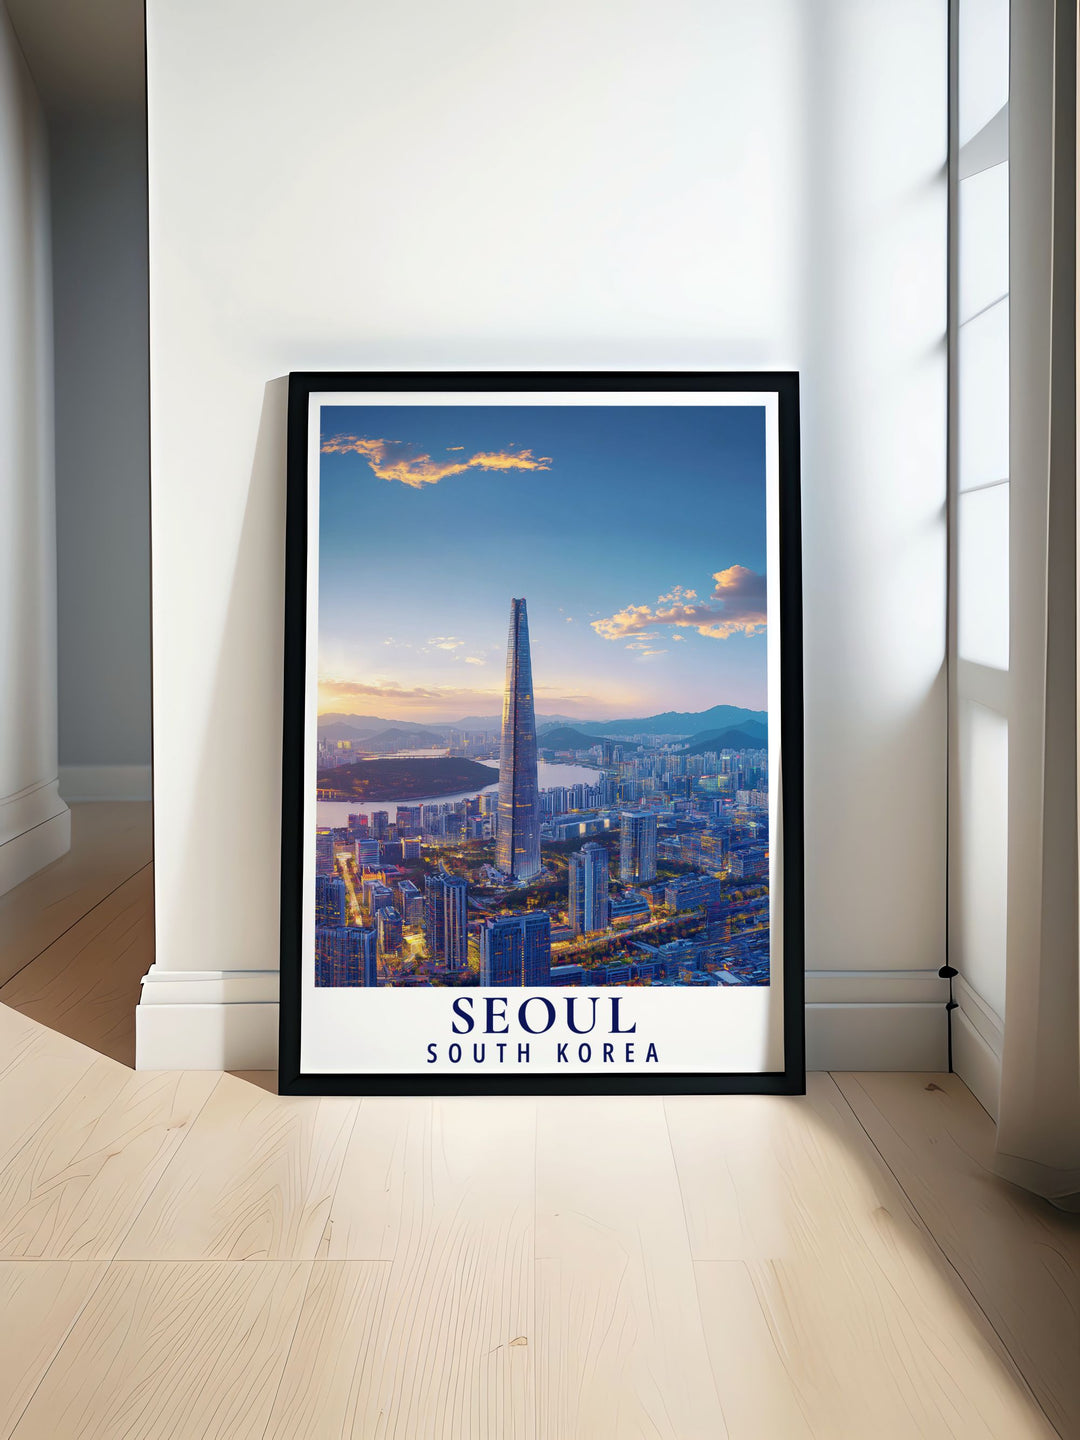 Featuring the vibrant skyline of Seoul, this poster highlights the contrast between historic landmarks and modern skyscrapers, offering a glimpse into the dynamic city life of South Koreas capital.